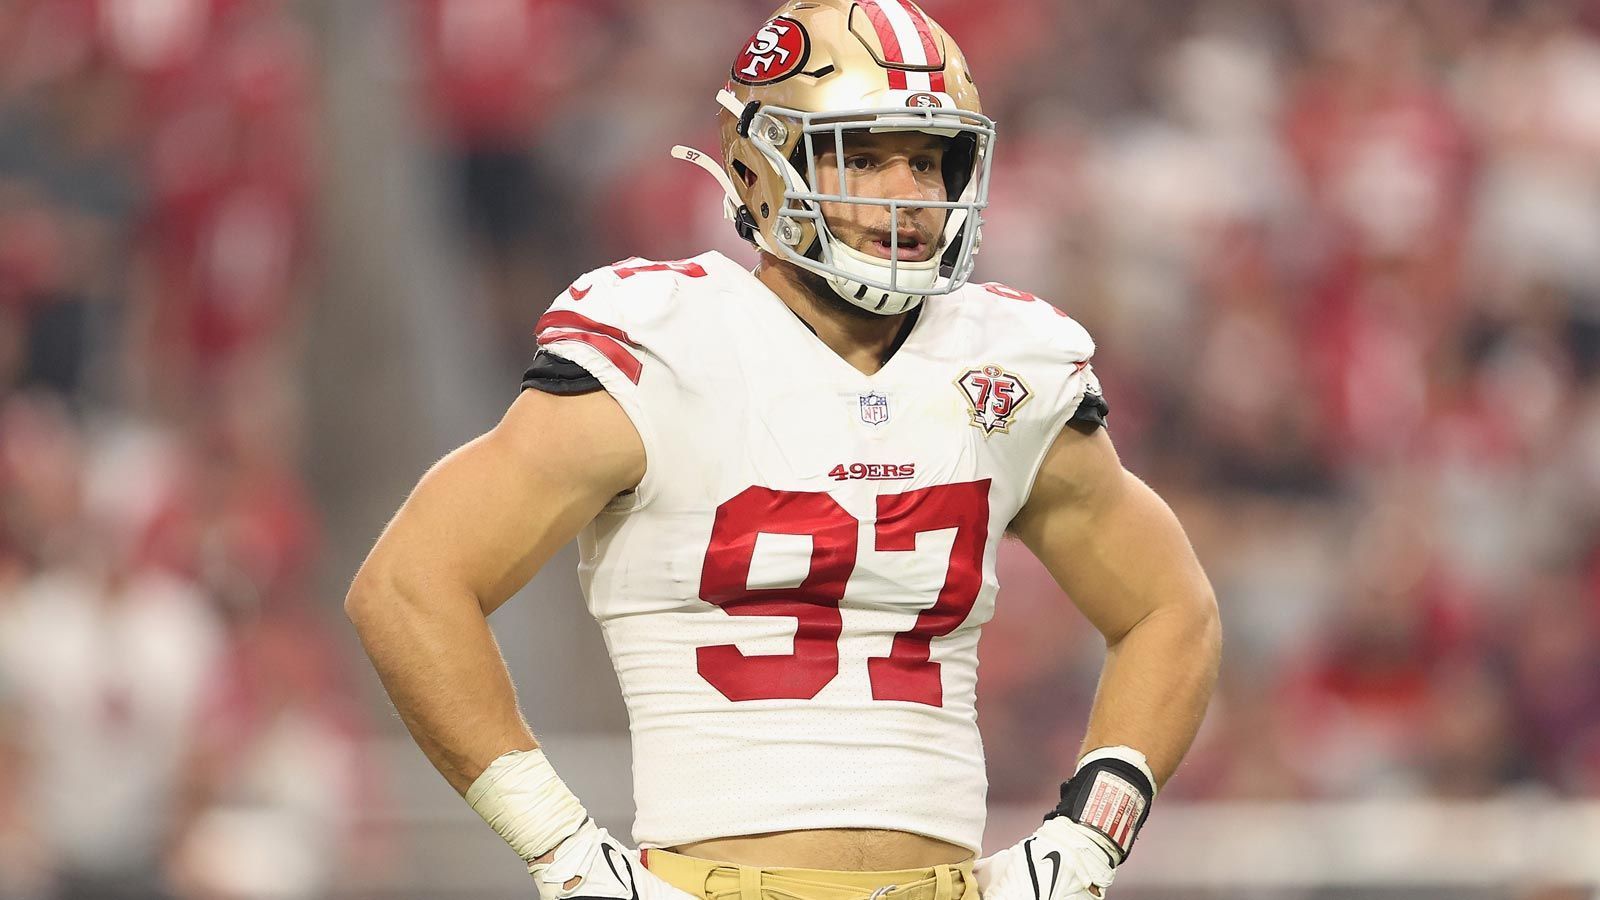 
                <strong>Nick Bosa (San Francisco 49ers)</strong><br>
                Draftposition: Runde 1/Pick 2 (2019) -Spiele: 27 -Wichtigste Statistiken: 17 Sacks, 59 Tackles, vier Forced Fumbles -Auszeichnungen/Erfolge: Defensive Rookie of the Year (2019), Pro Bowl (2019)
              